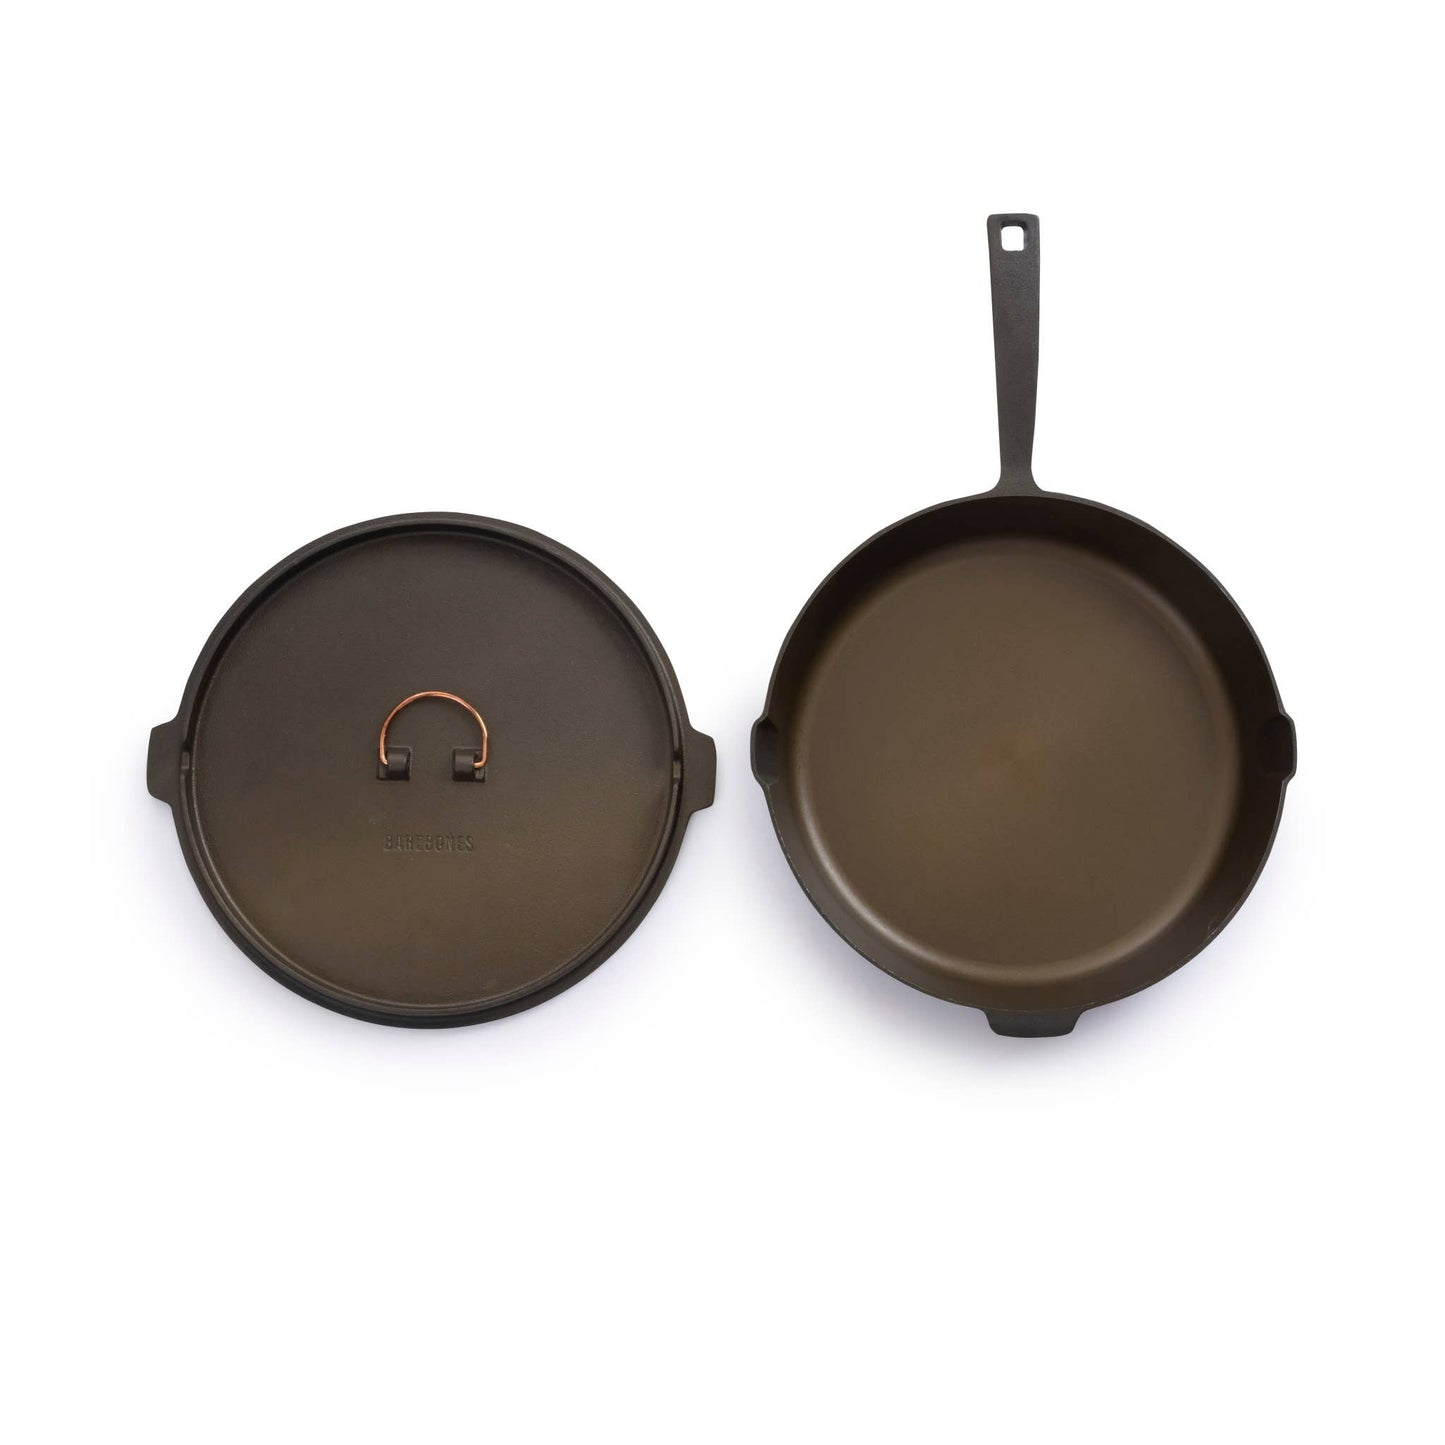 All-In-One Cast Iron Skillet: 12"